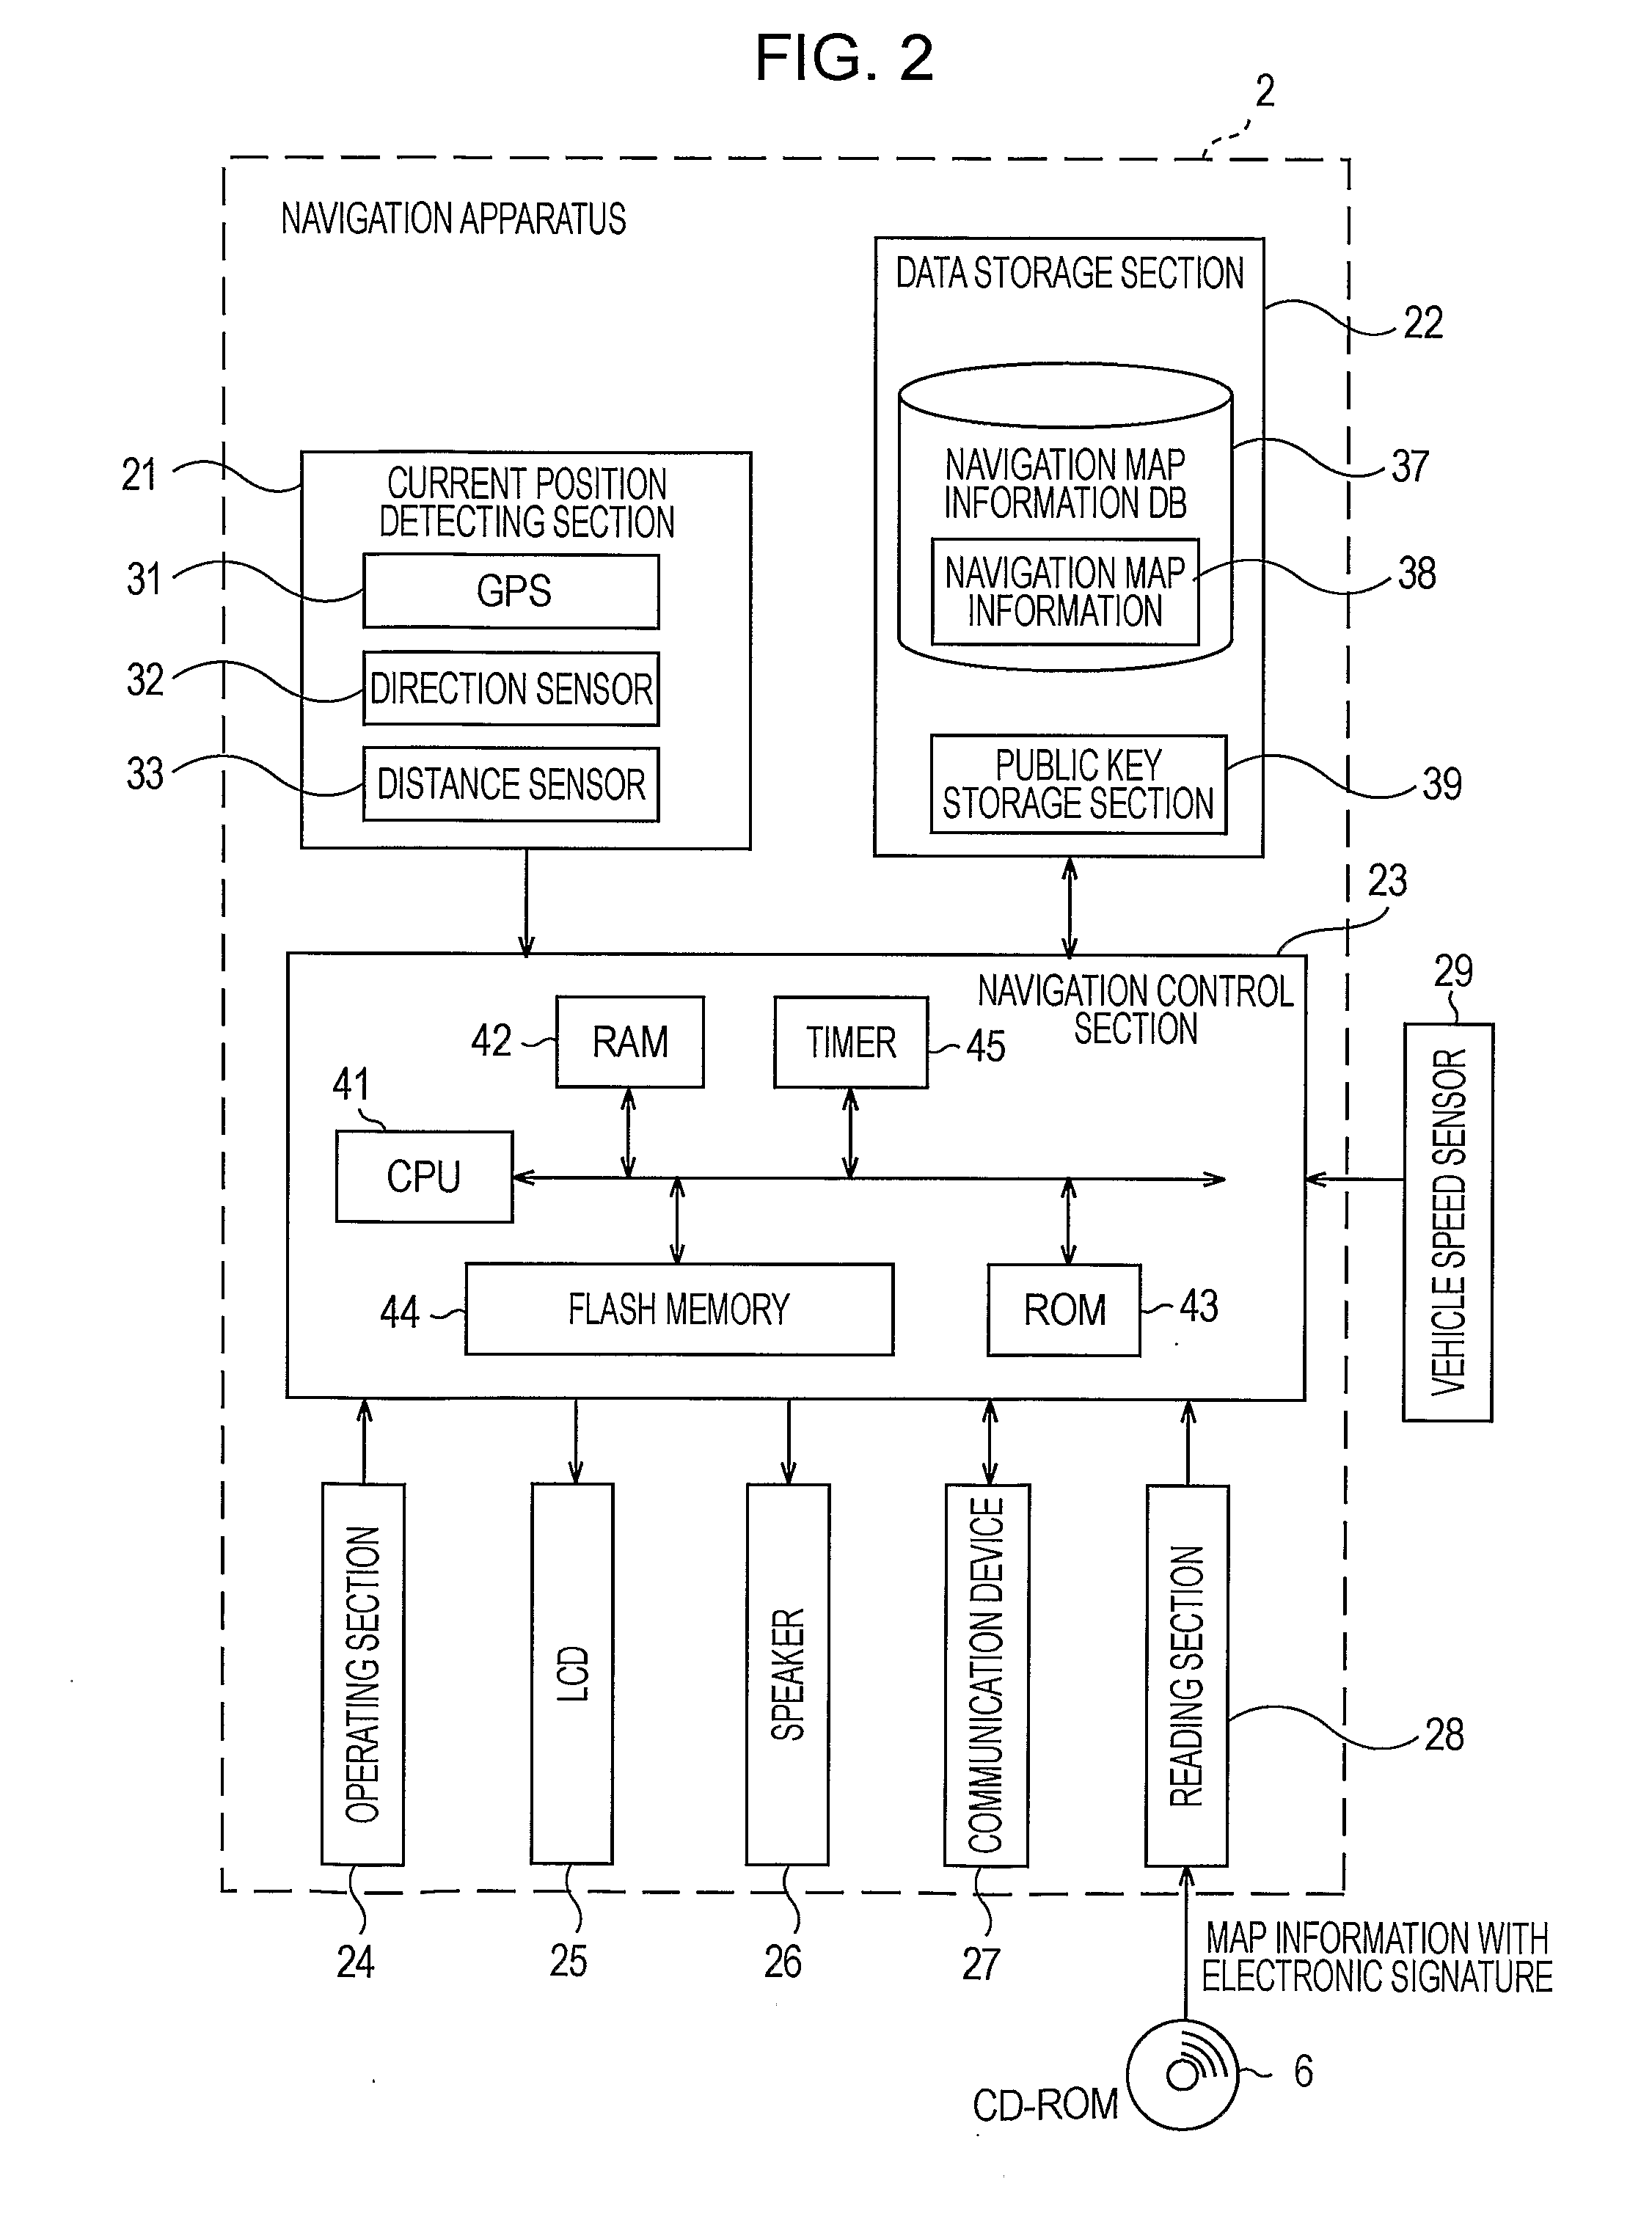 Navigation apparatus and information distribution system